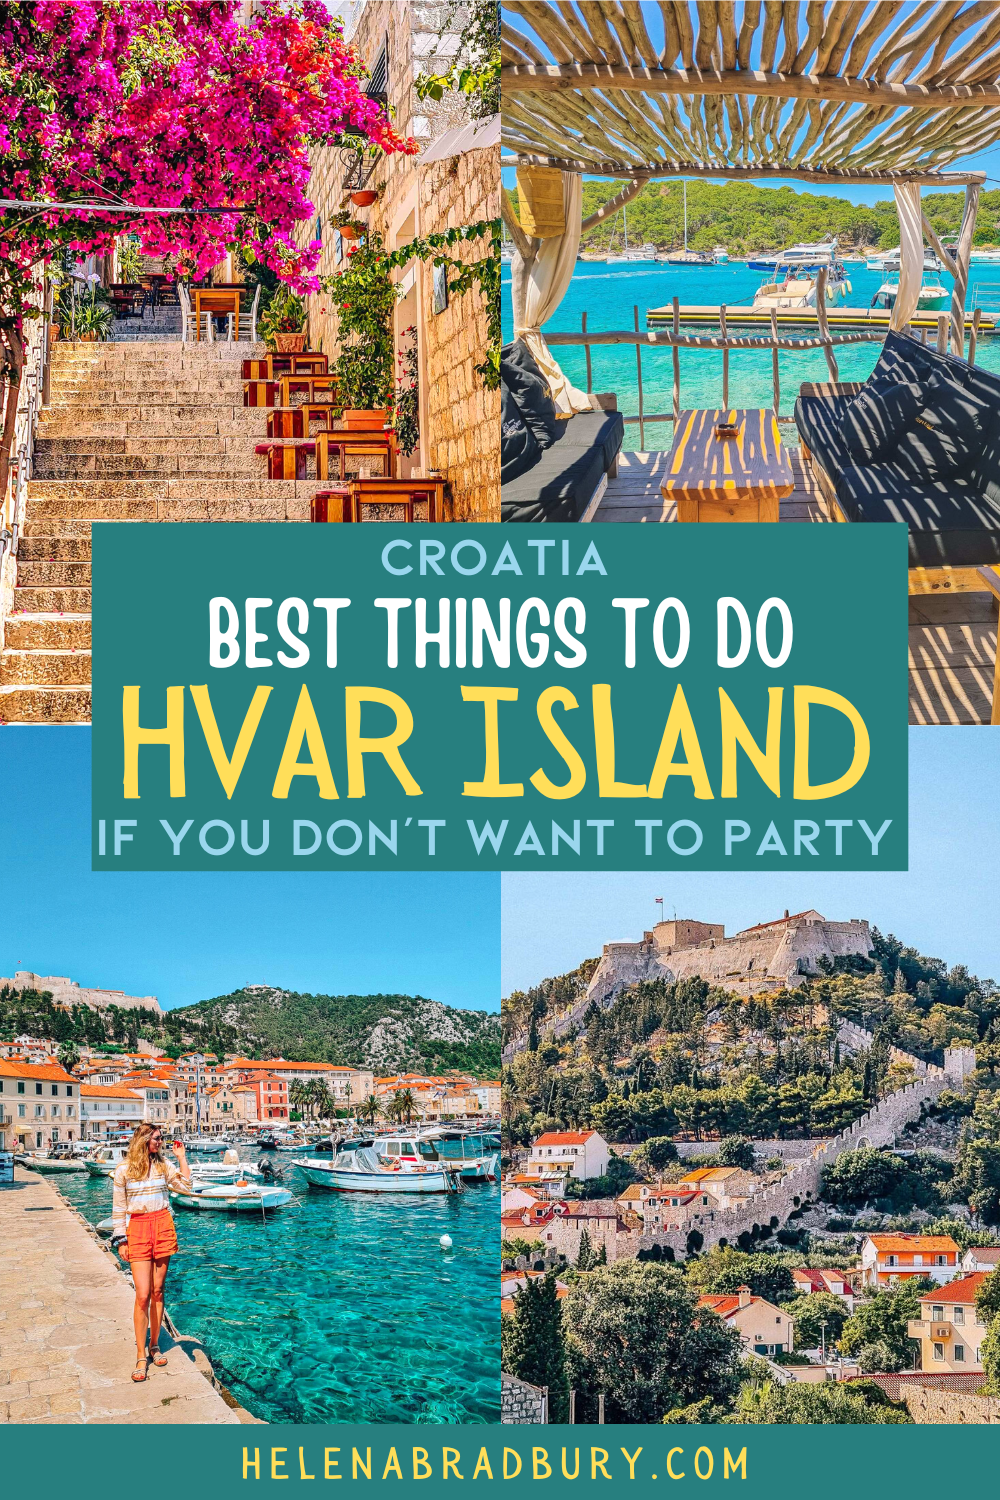 The ultimate guide to the best things to do on Hvar island if you don’t want to party! From beaches to wineries to hiking trails, discover more of Hvar, Croatia beyond the nightlife associated with the island. | best things to do in hvar | hvar islan